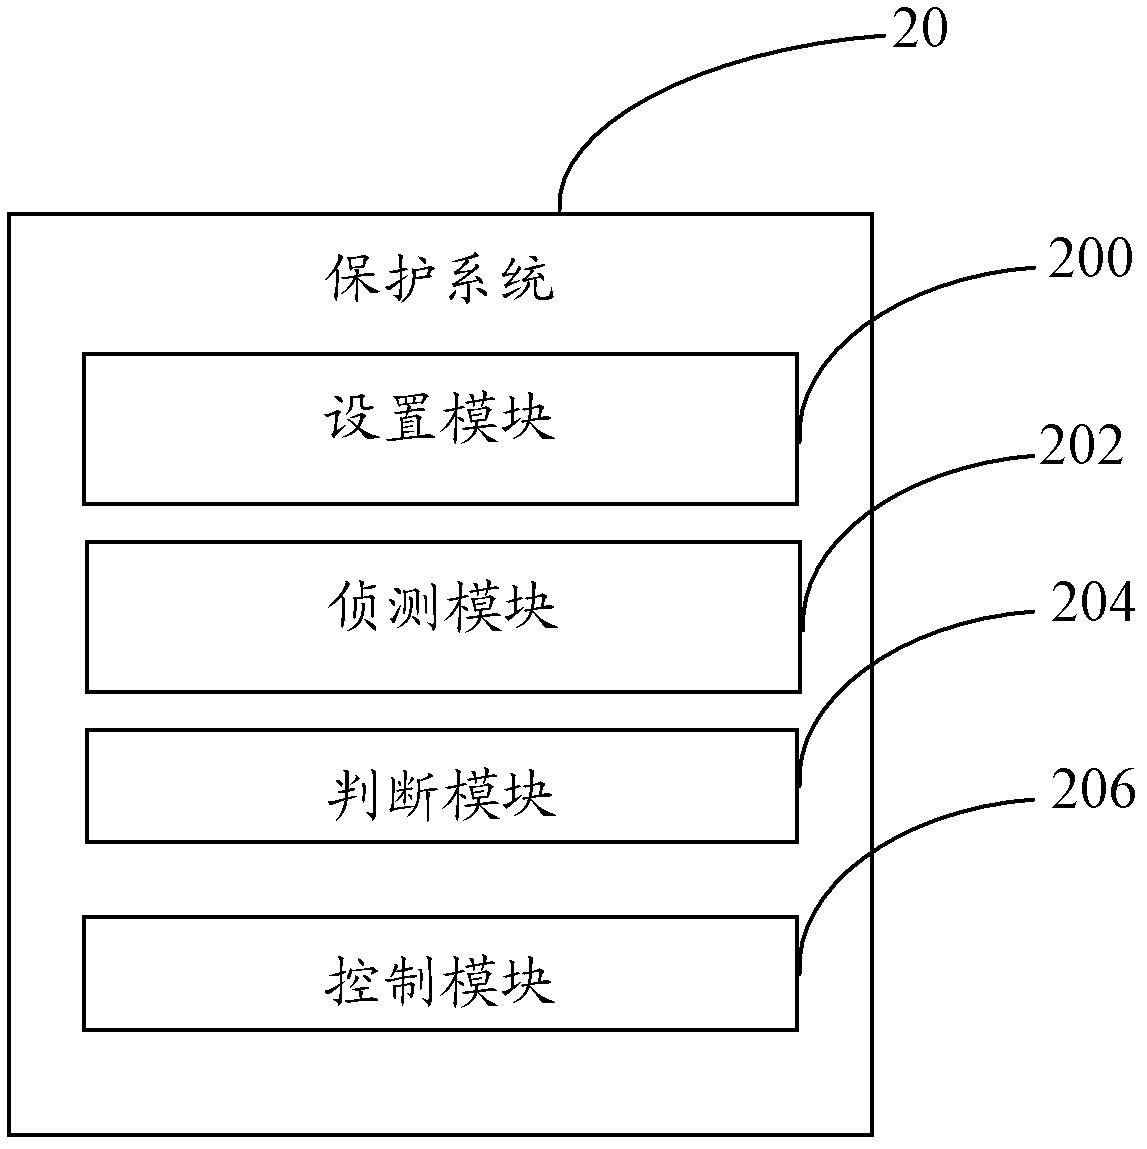 Automatic protective system and method for watered mobile phone